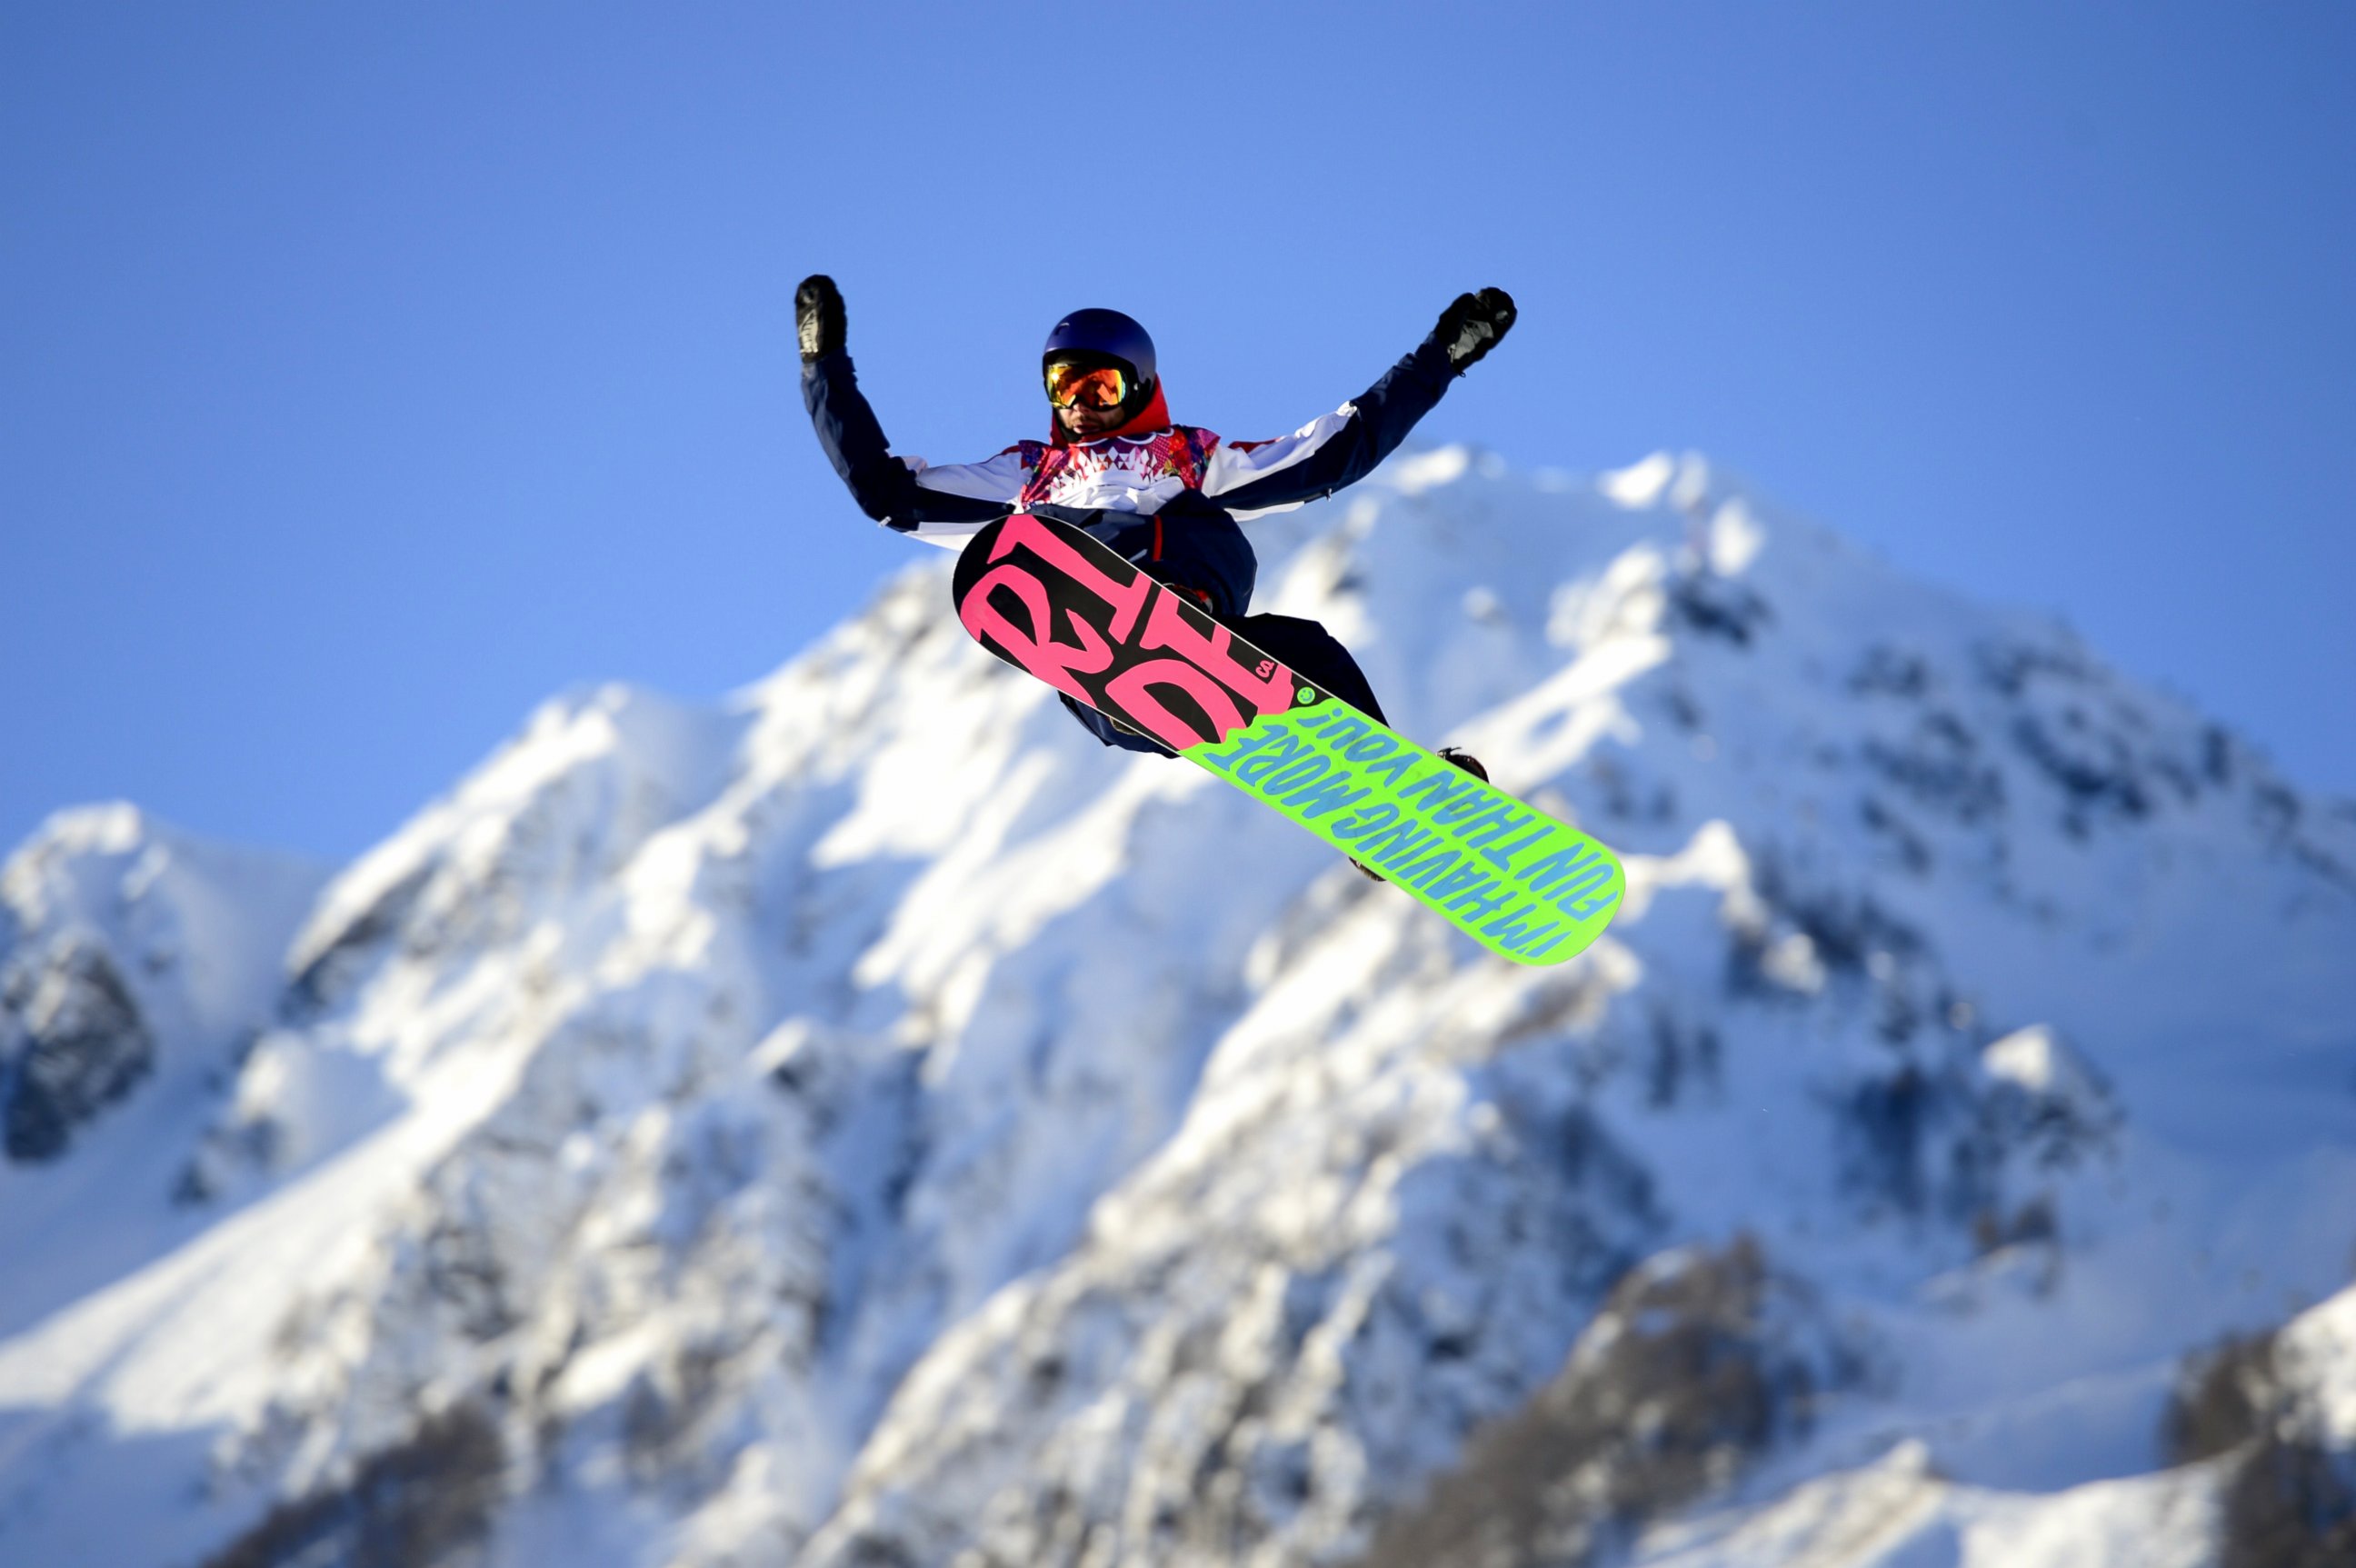 PHOTO: Great Britain's Billy Morgan competes in the men's snowboard slopestyle qualification at the Rosa Khutor Extreme Park during the 2014 Sochi Winter Olympics, Feb. 6, 2014. 